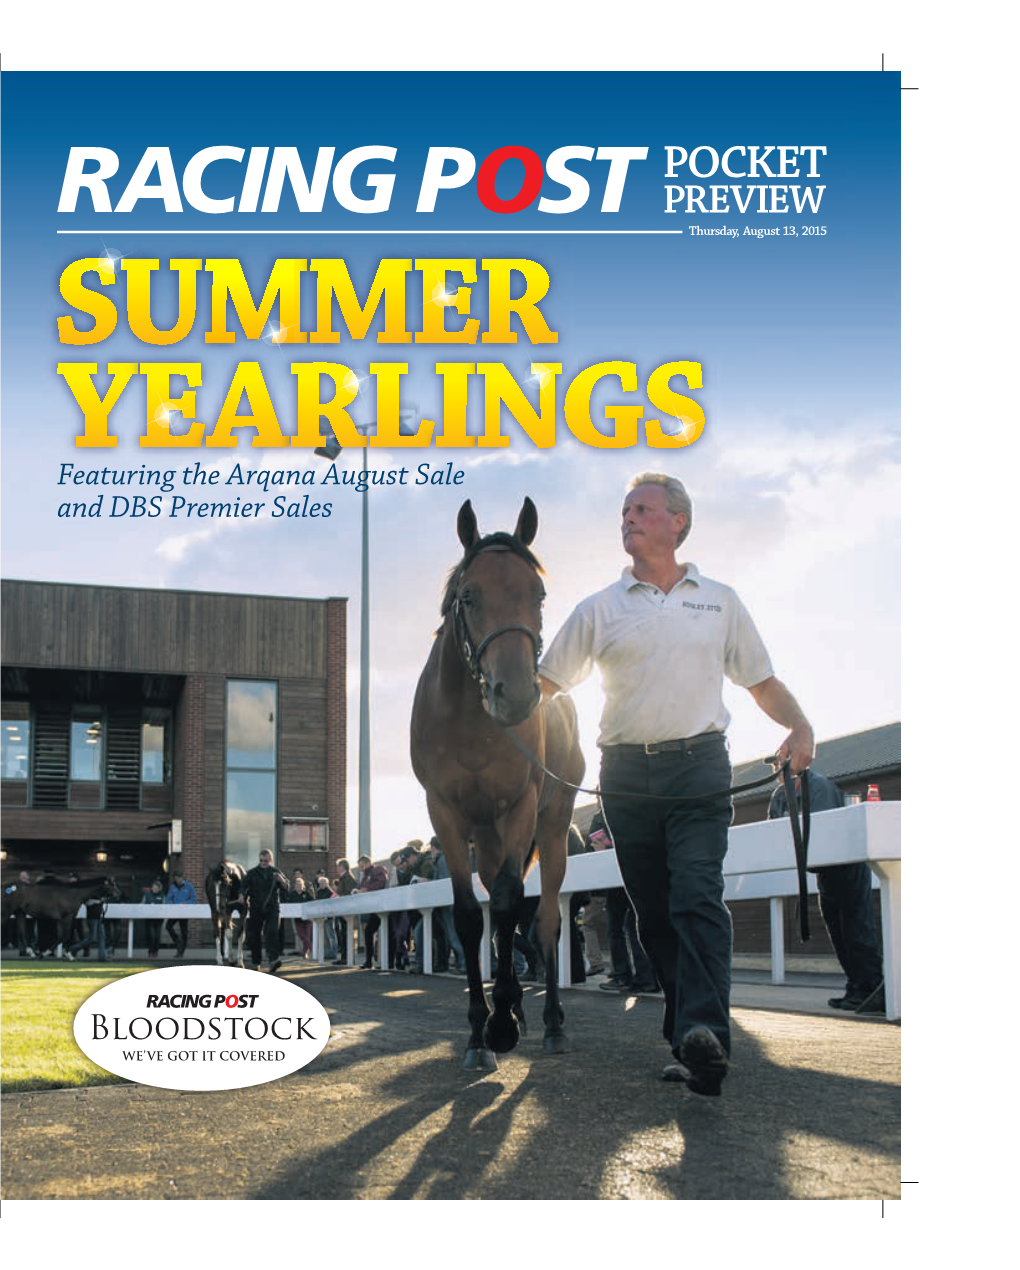 Featuring the Arqana August Sale and DBS Premier Sales 2 Deauville Thursday, August 13, 2015 Racingpost.Com